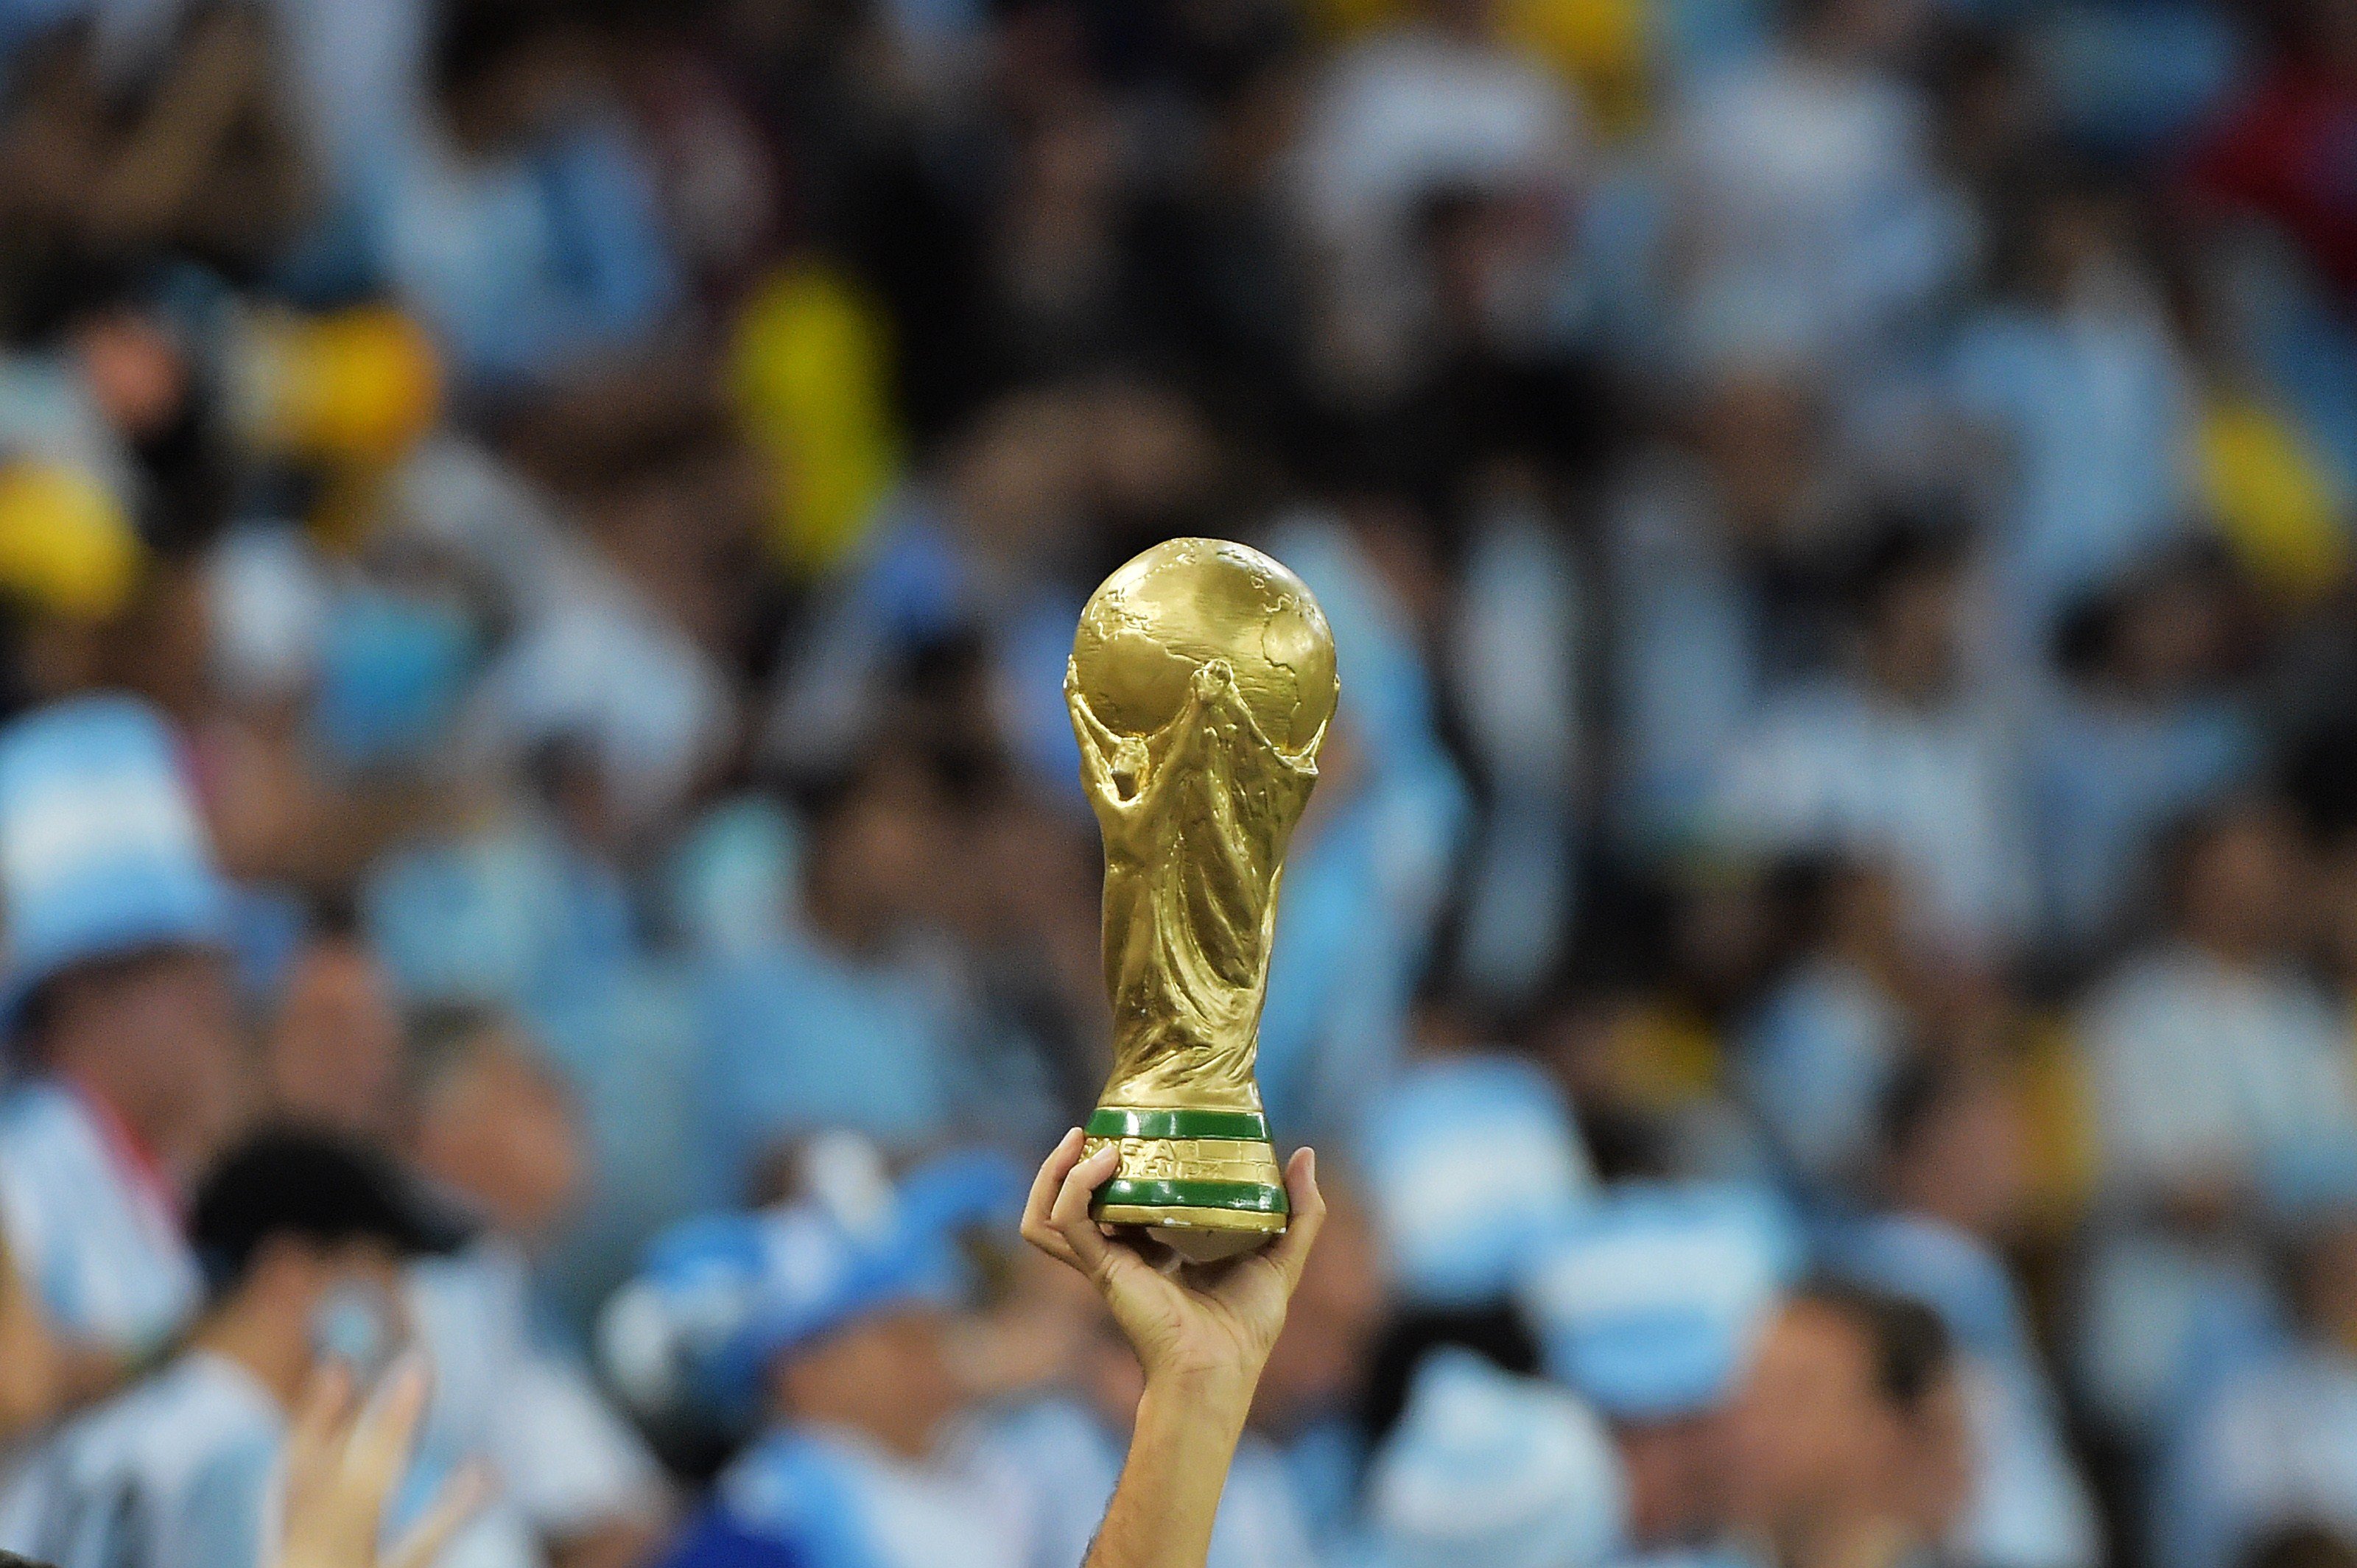 An Argentine fan holds a replica of the World Cup trophy before the start of a Group F football match between Argentina and Bosnia Hercegovina at the Maracana Stadium in Rio De Janeiro during the 2014 FIFA World Cup on June 15, 2014.